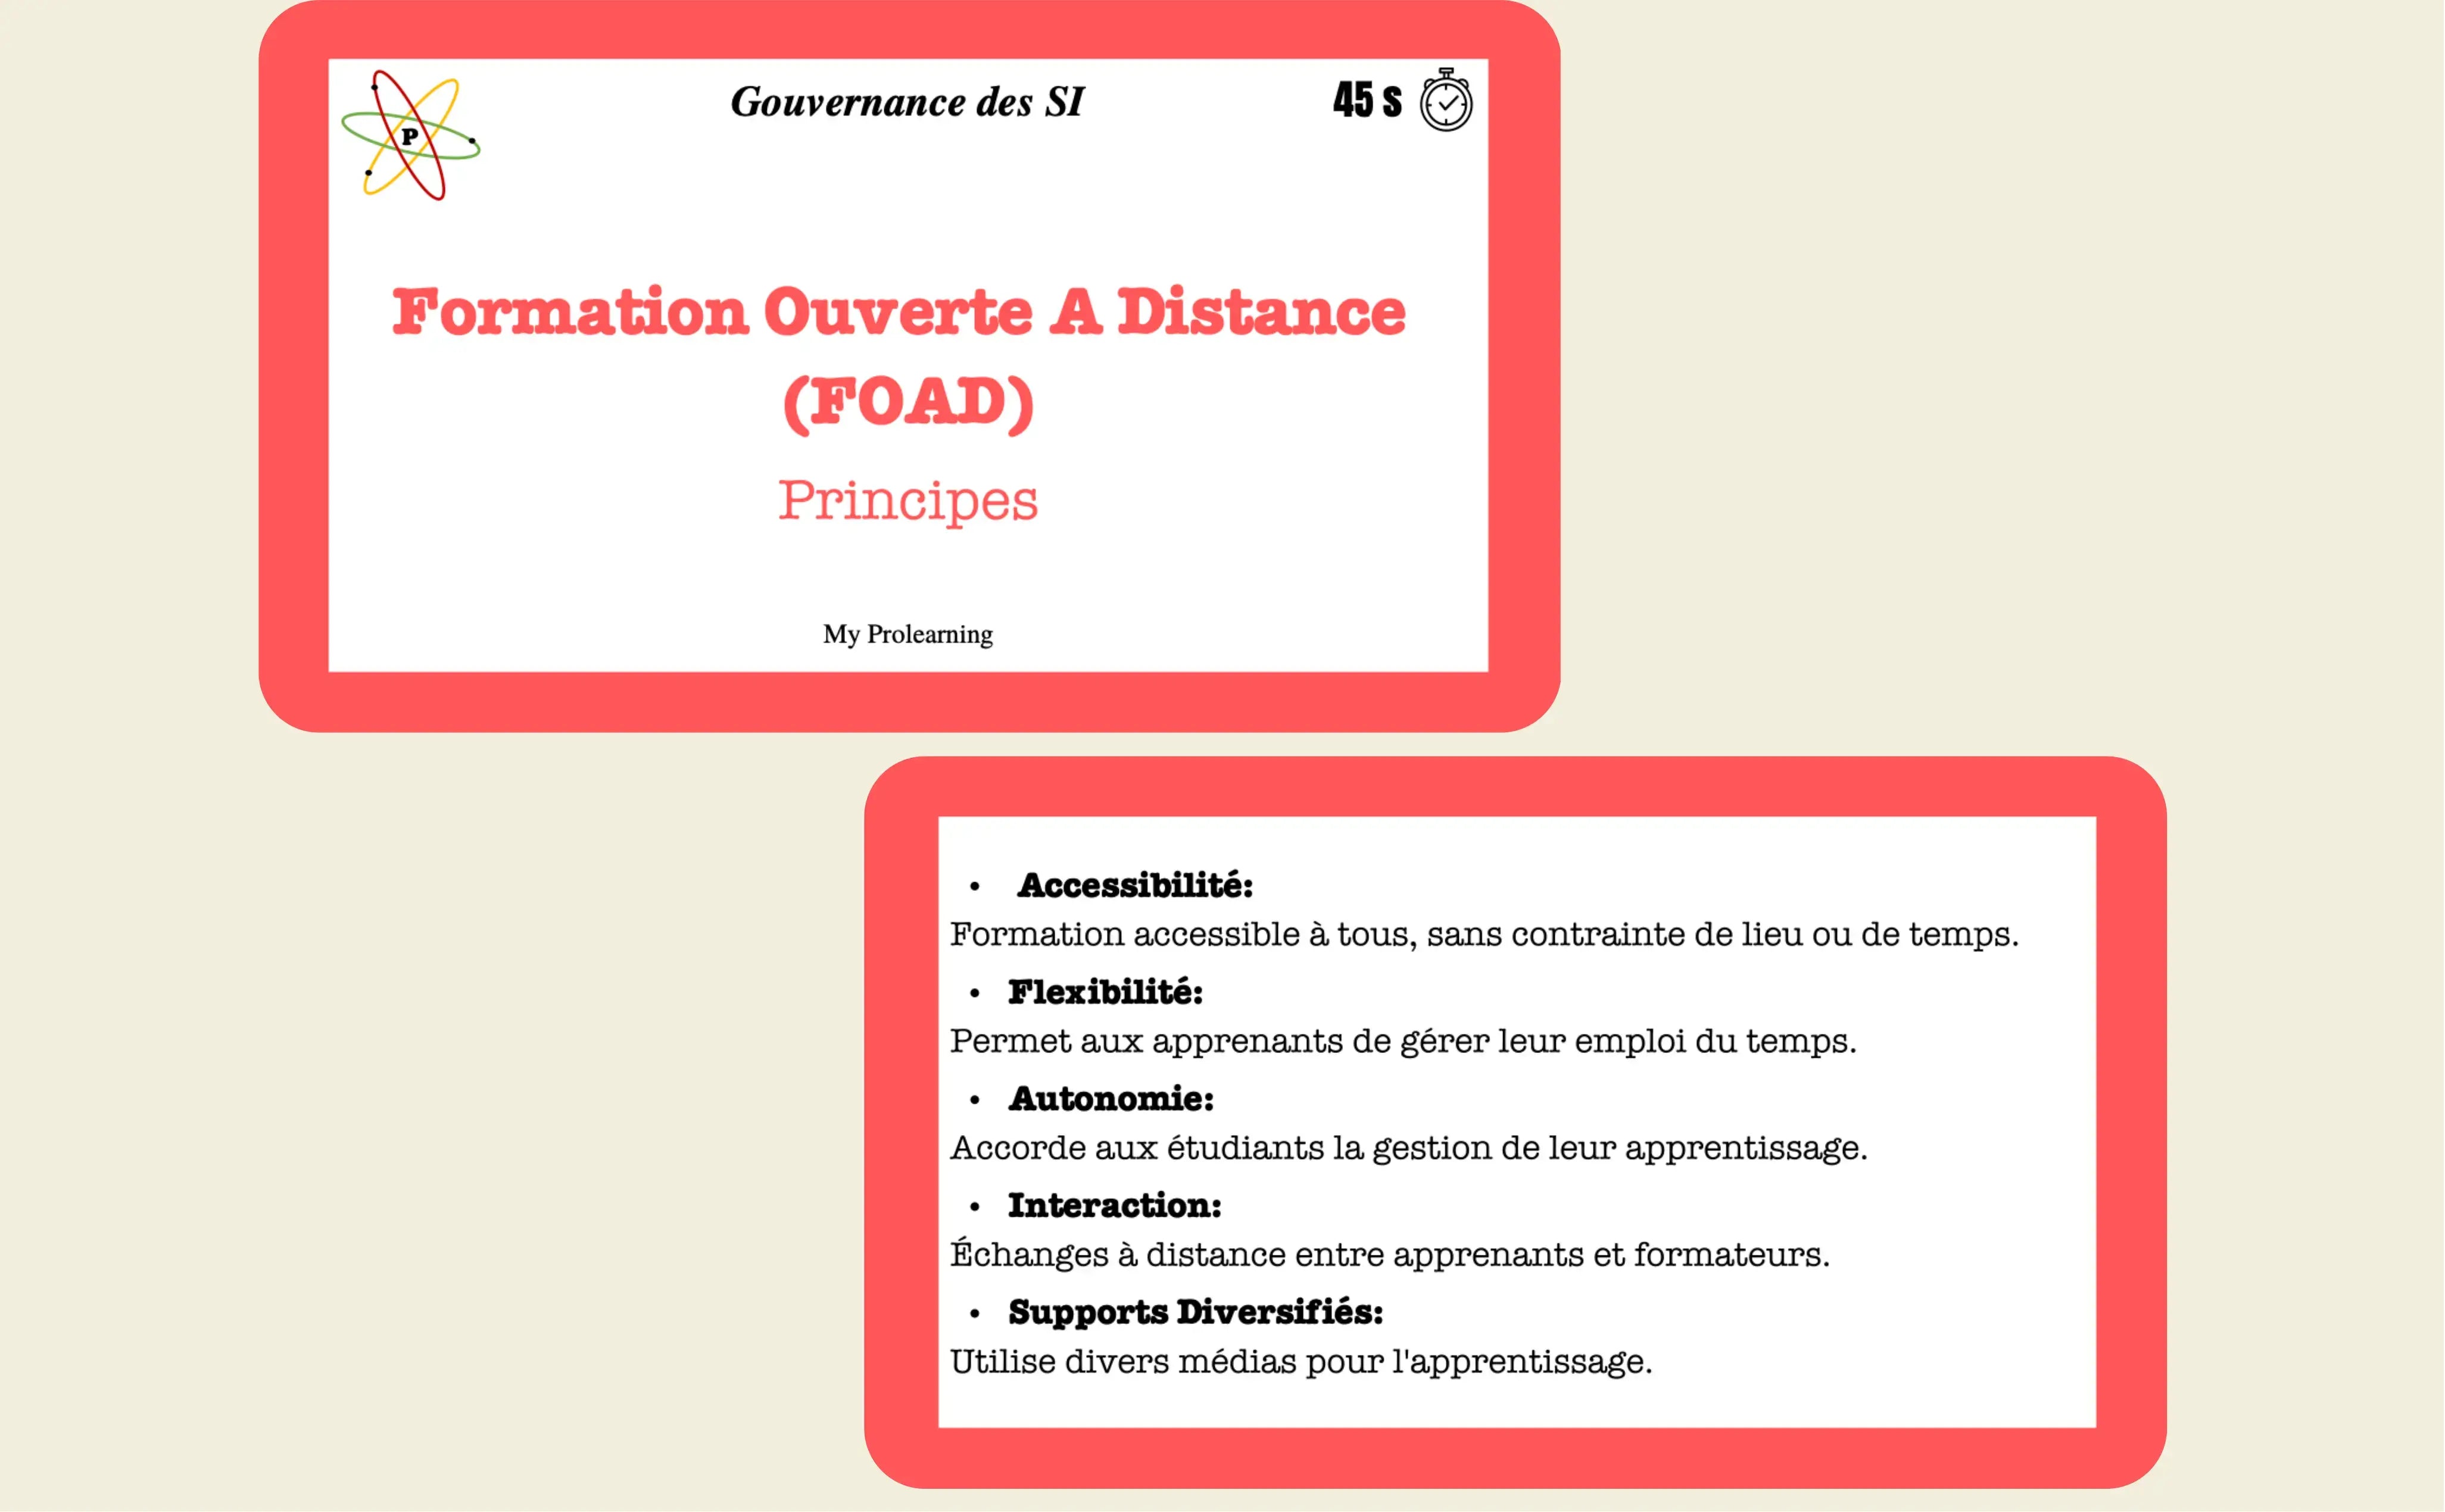 FICHES GOUVERNANCE DES SI - My Prolearning 